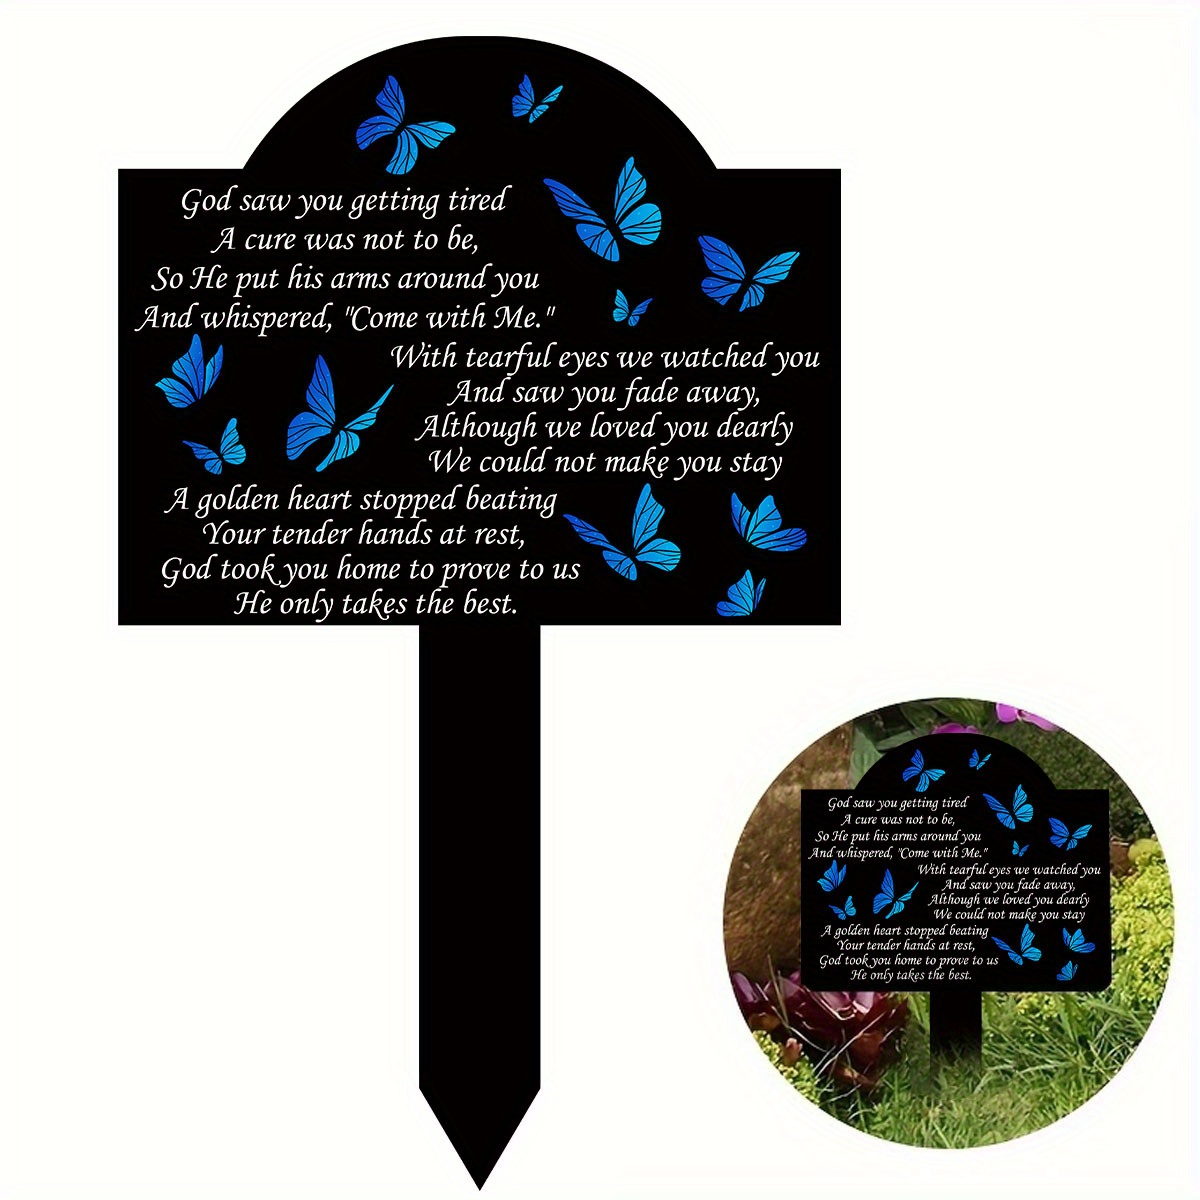 

1pc Butterfly Memorial Stake Memorial Gifts For Loss Of Mother Memorial Plaques Black Waterproof Acrylic Grave Marker Cemetery Decor Sympathy Garden Stake For Outdoors Yard(warm Style)